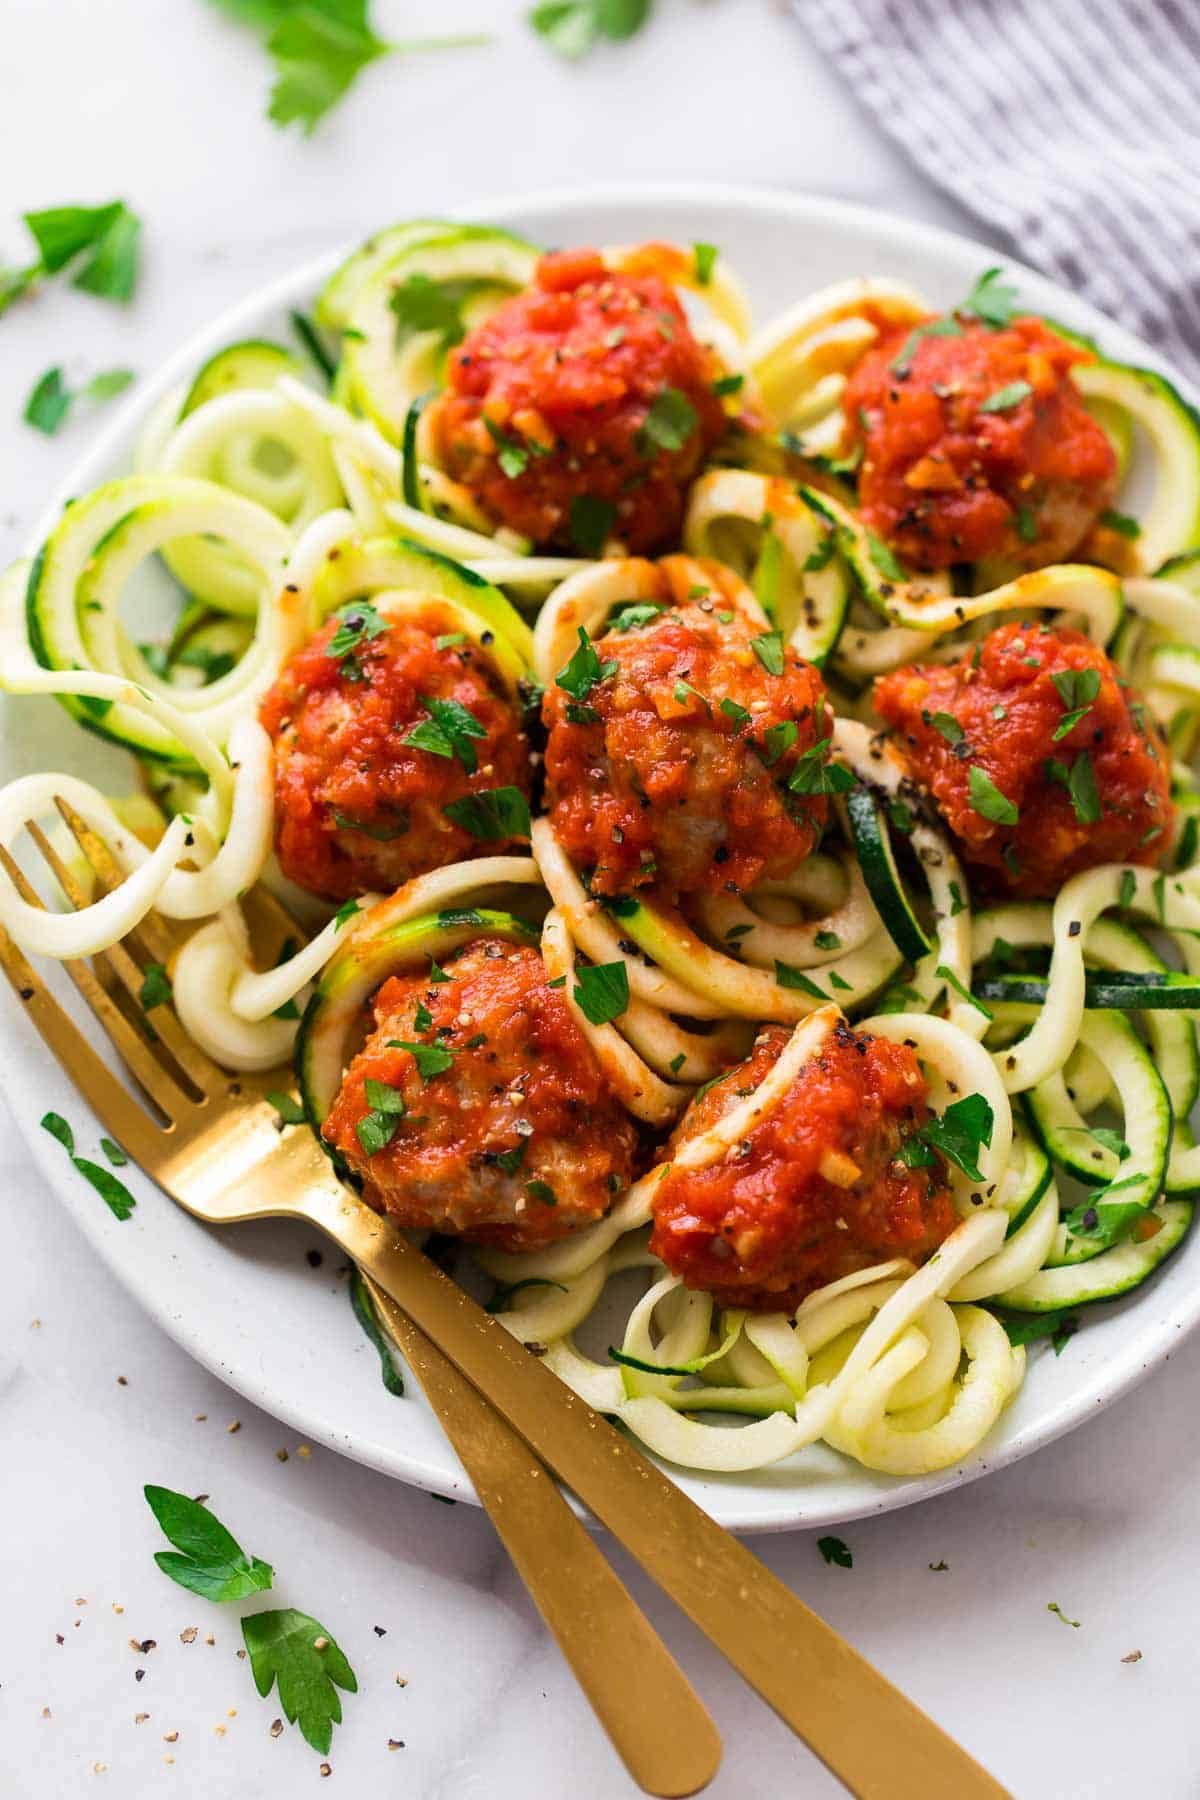 Turkey Meatballs with Zoodles Recipe | The Feedfeed